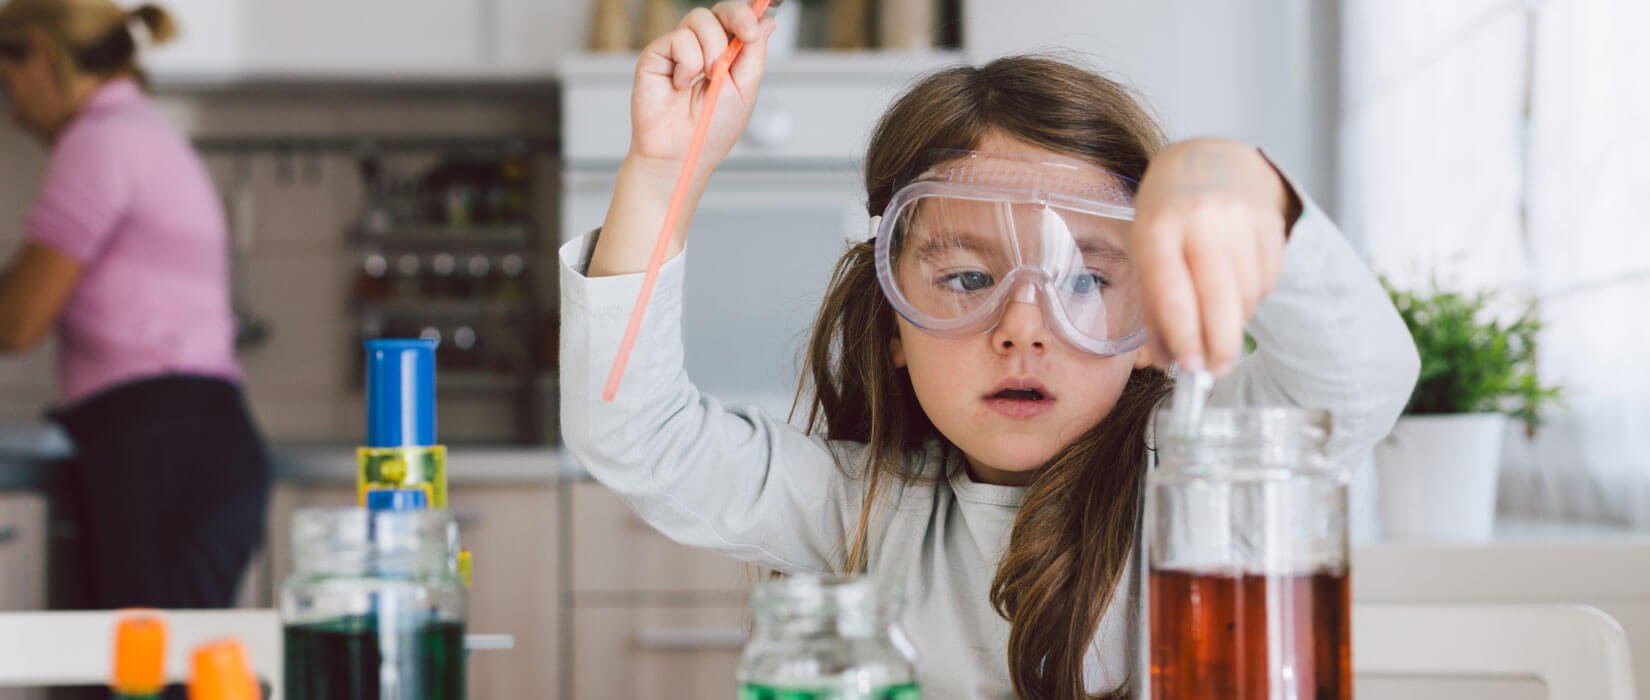 Little girl doing science experiments in the kitchen.